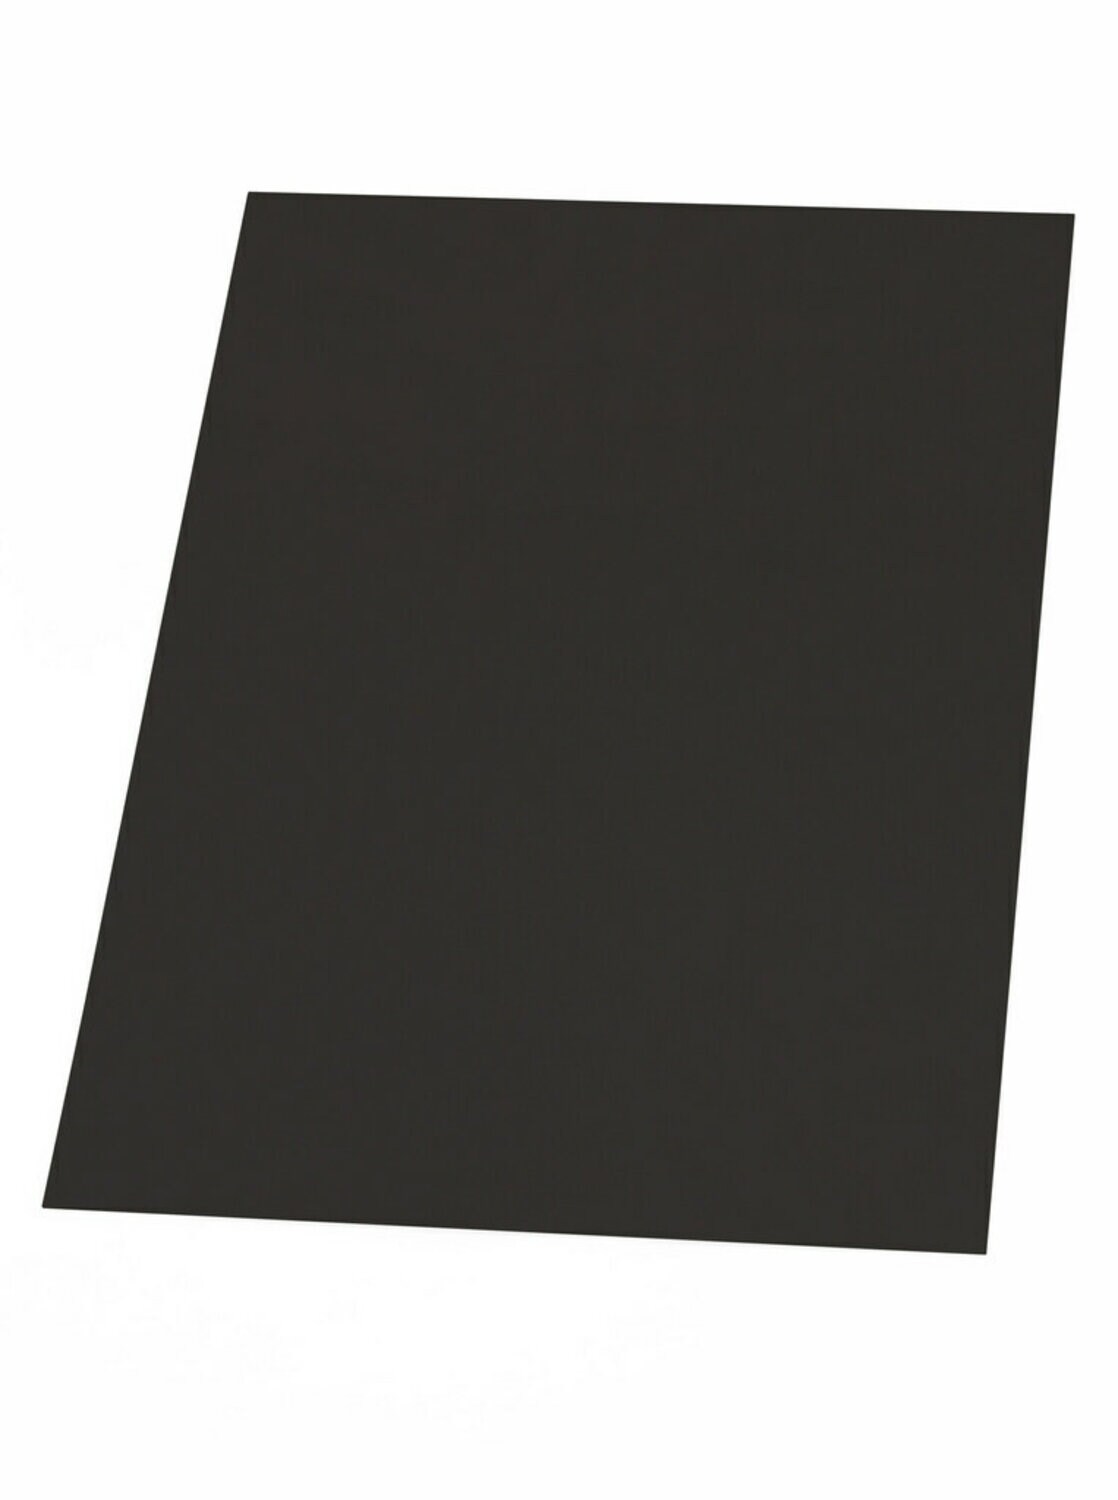 7010405202 - 3M Thermally Conductive Interface Pad Sheet 5595S, 210 mm x 300 mm 2.0
mm, 20/Case